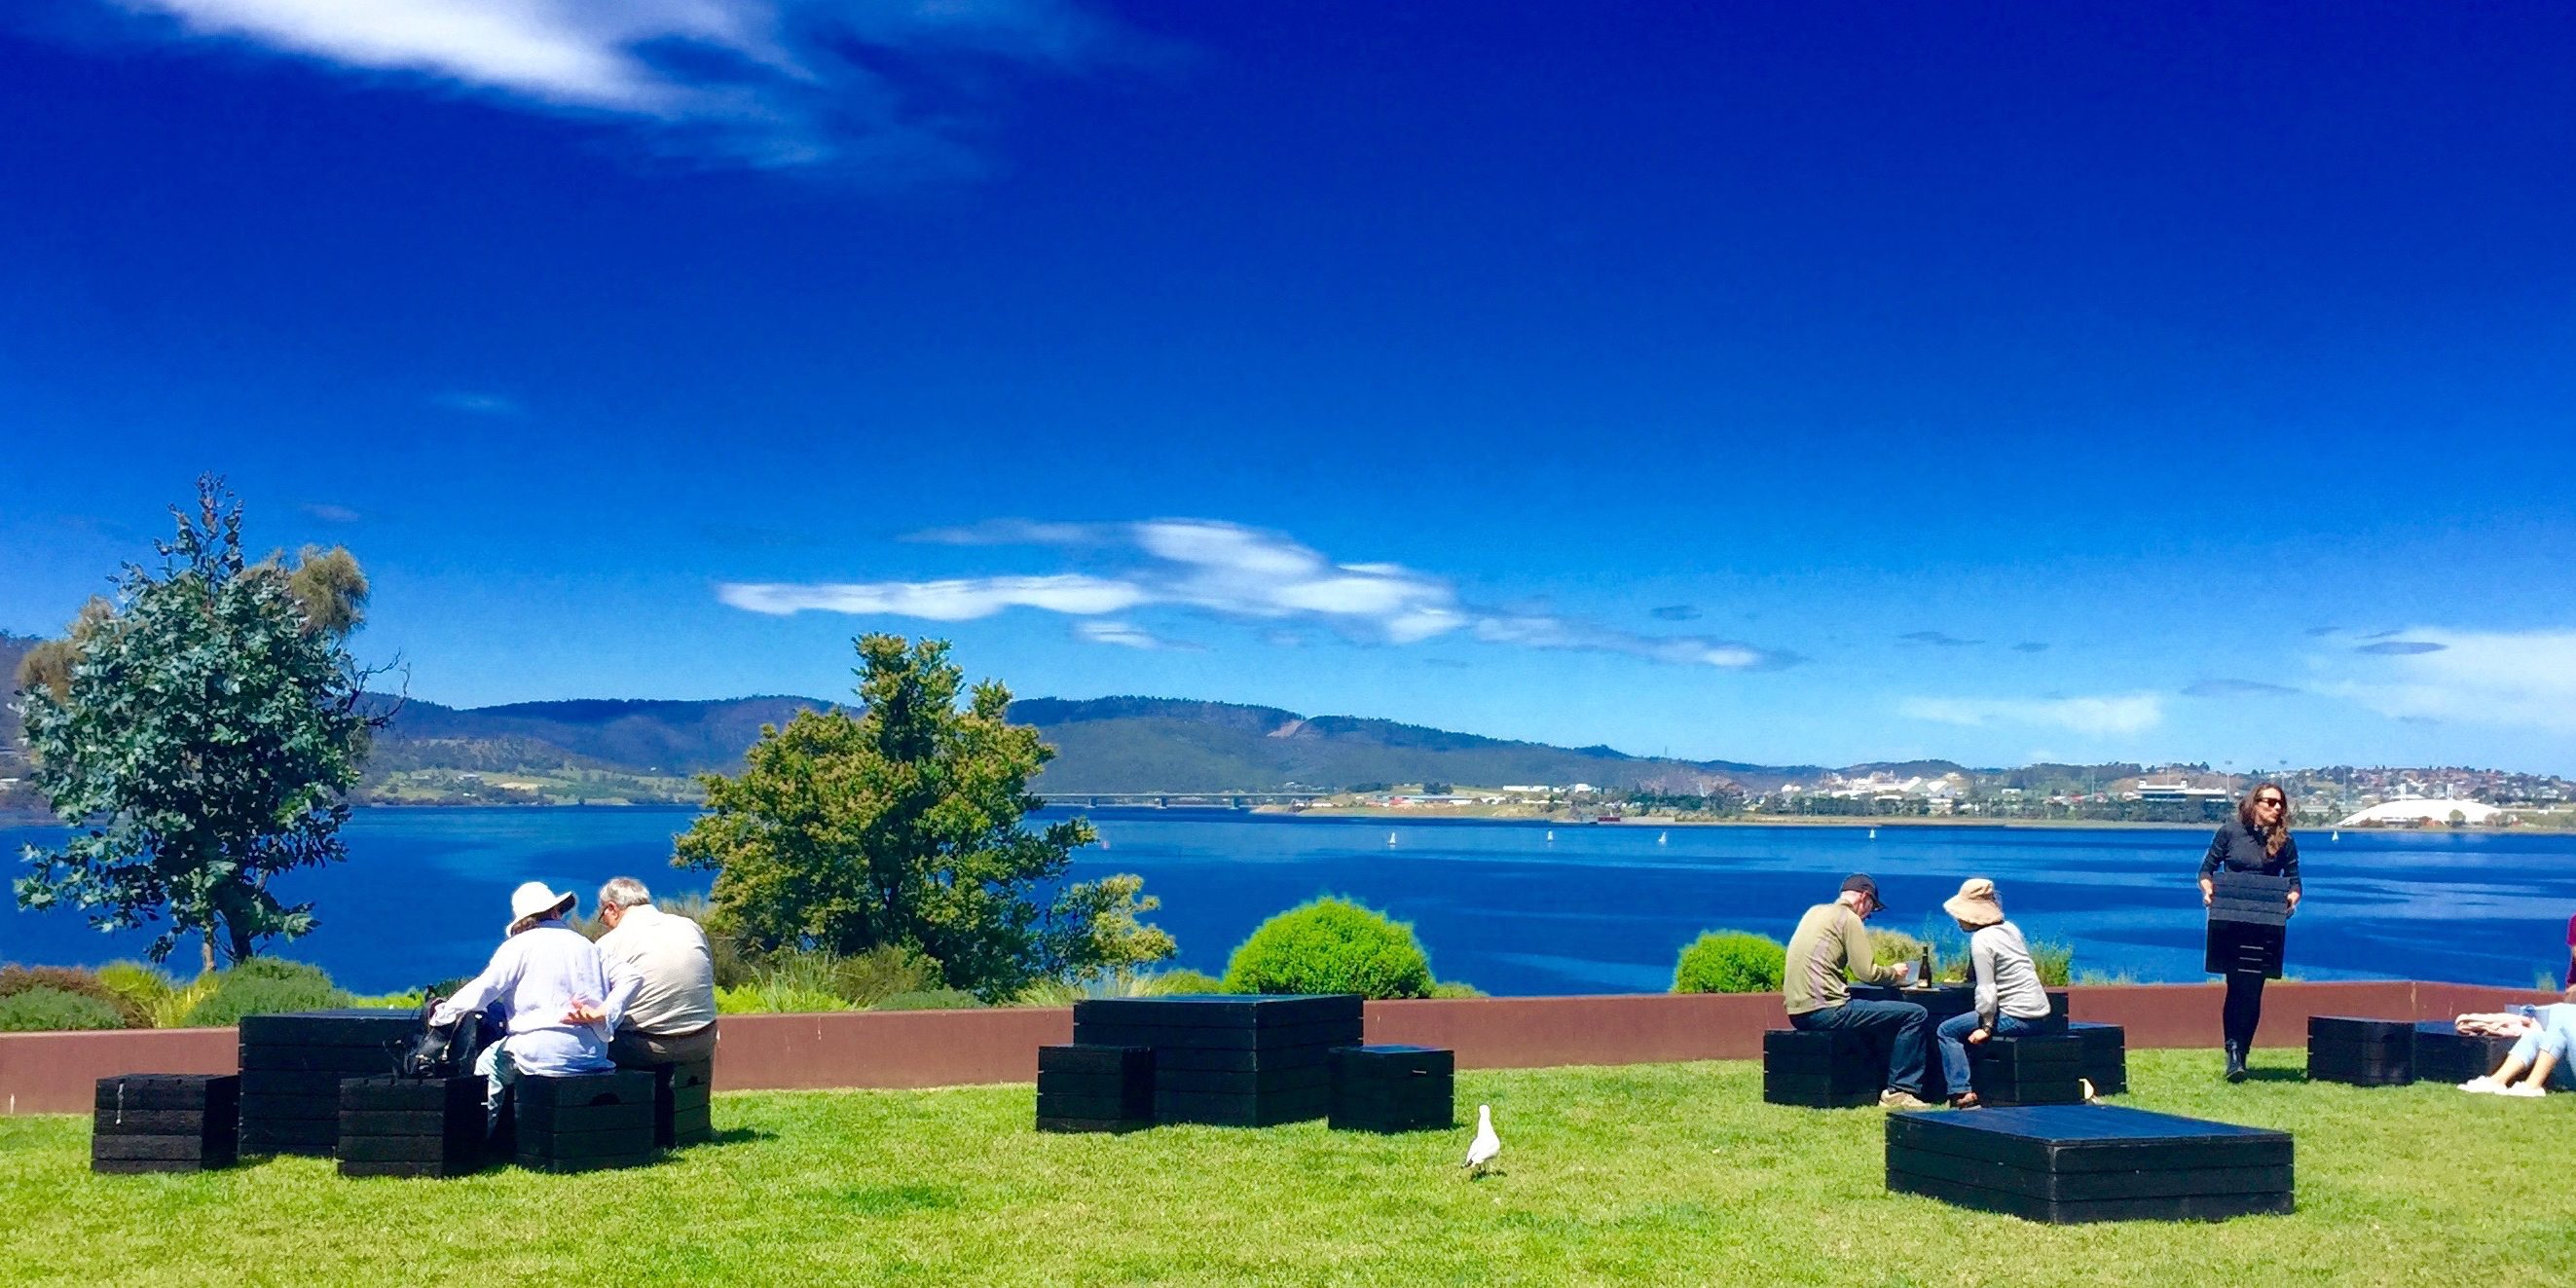 Christmas in Hobart: 7 great places to shop and relax - Just The Sizzle